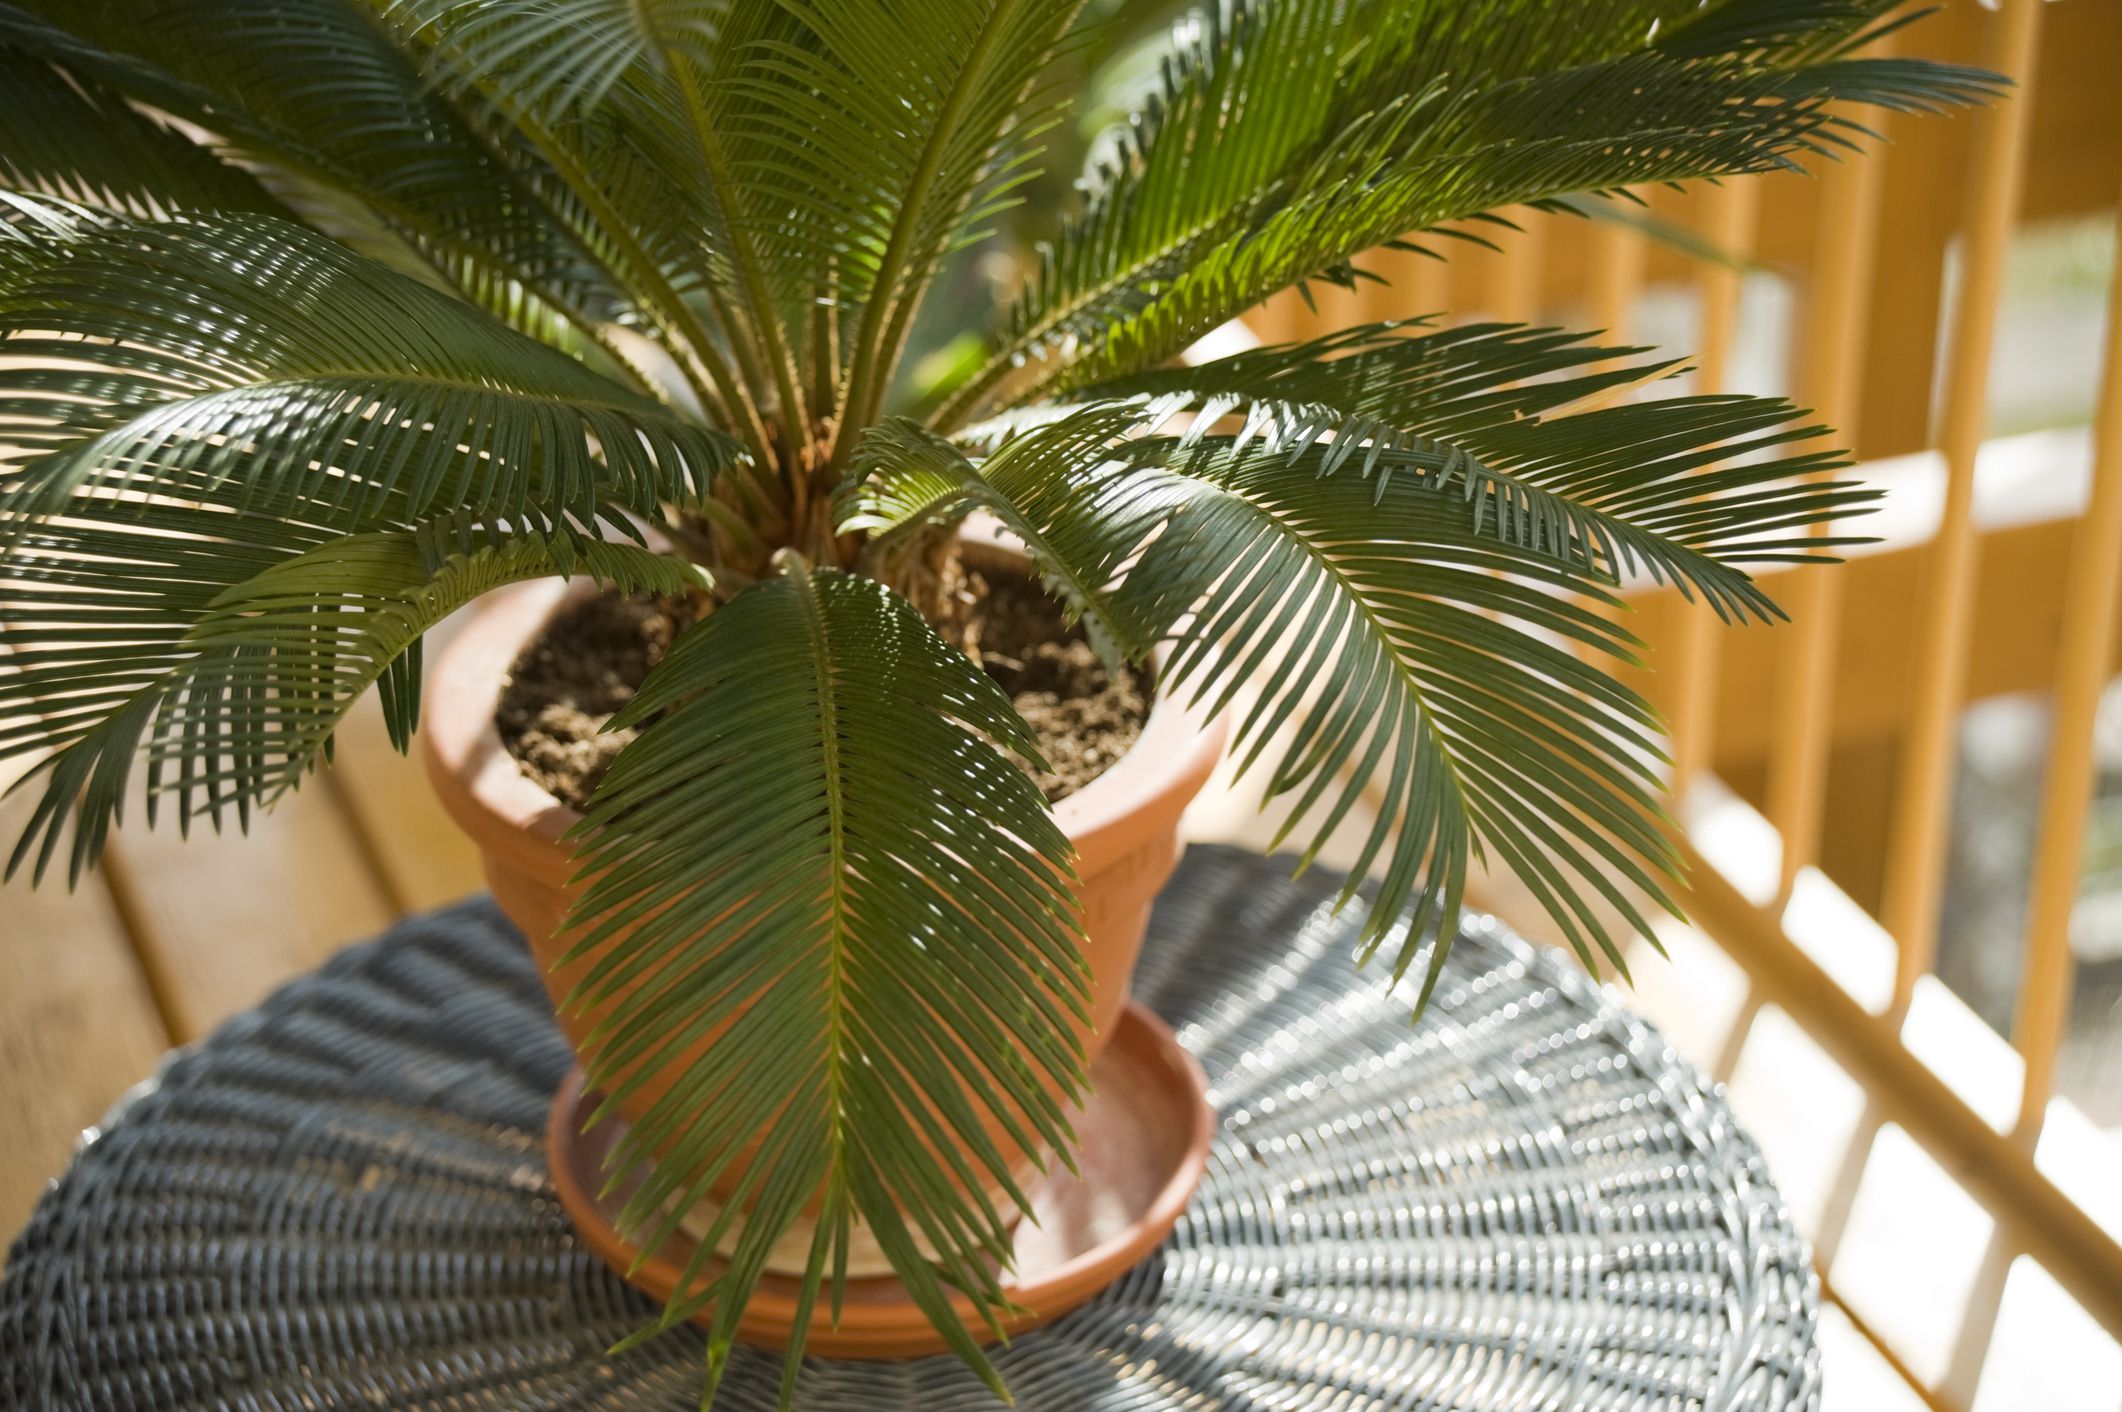 <p>Found growing in tropical climates, sago palms are a good choice for ornamental houseplants because they are easy to care for. All parts of the plant are considered poisonous to animals, though — with the seeds being the most toxic. Sago palm contains cycasin, a toxic agent that can cause liver failure in dogs. Symptoms such as lethargy, vomiting, and diarrhea may appear within 15 minutes after ingestion.</p>